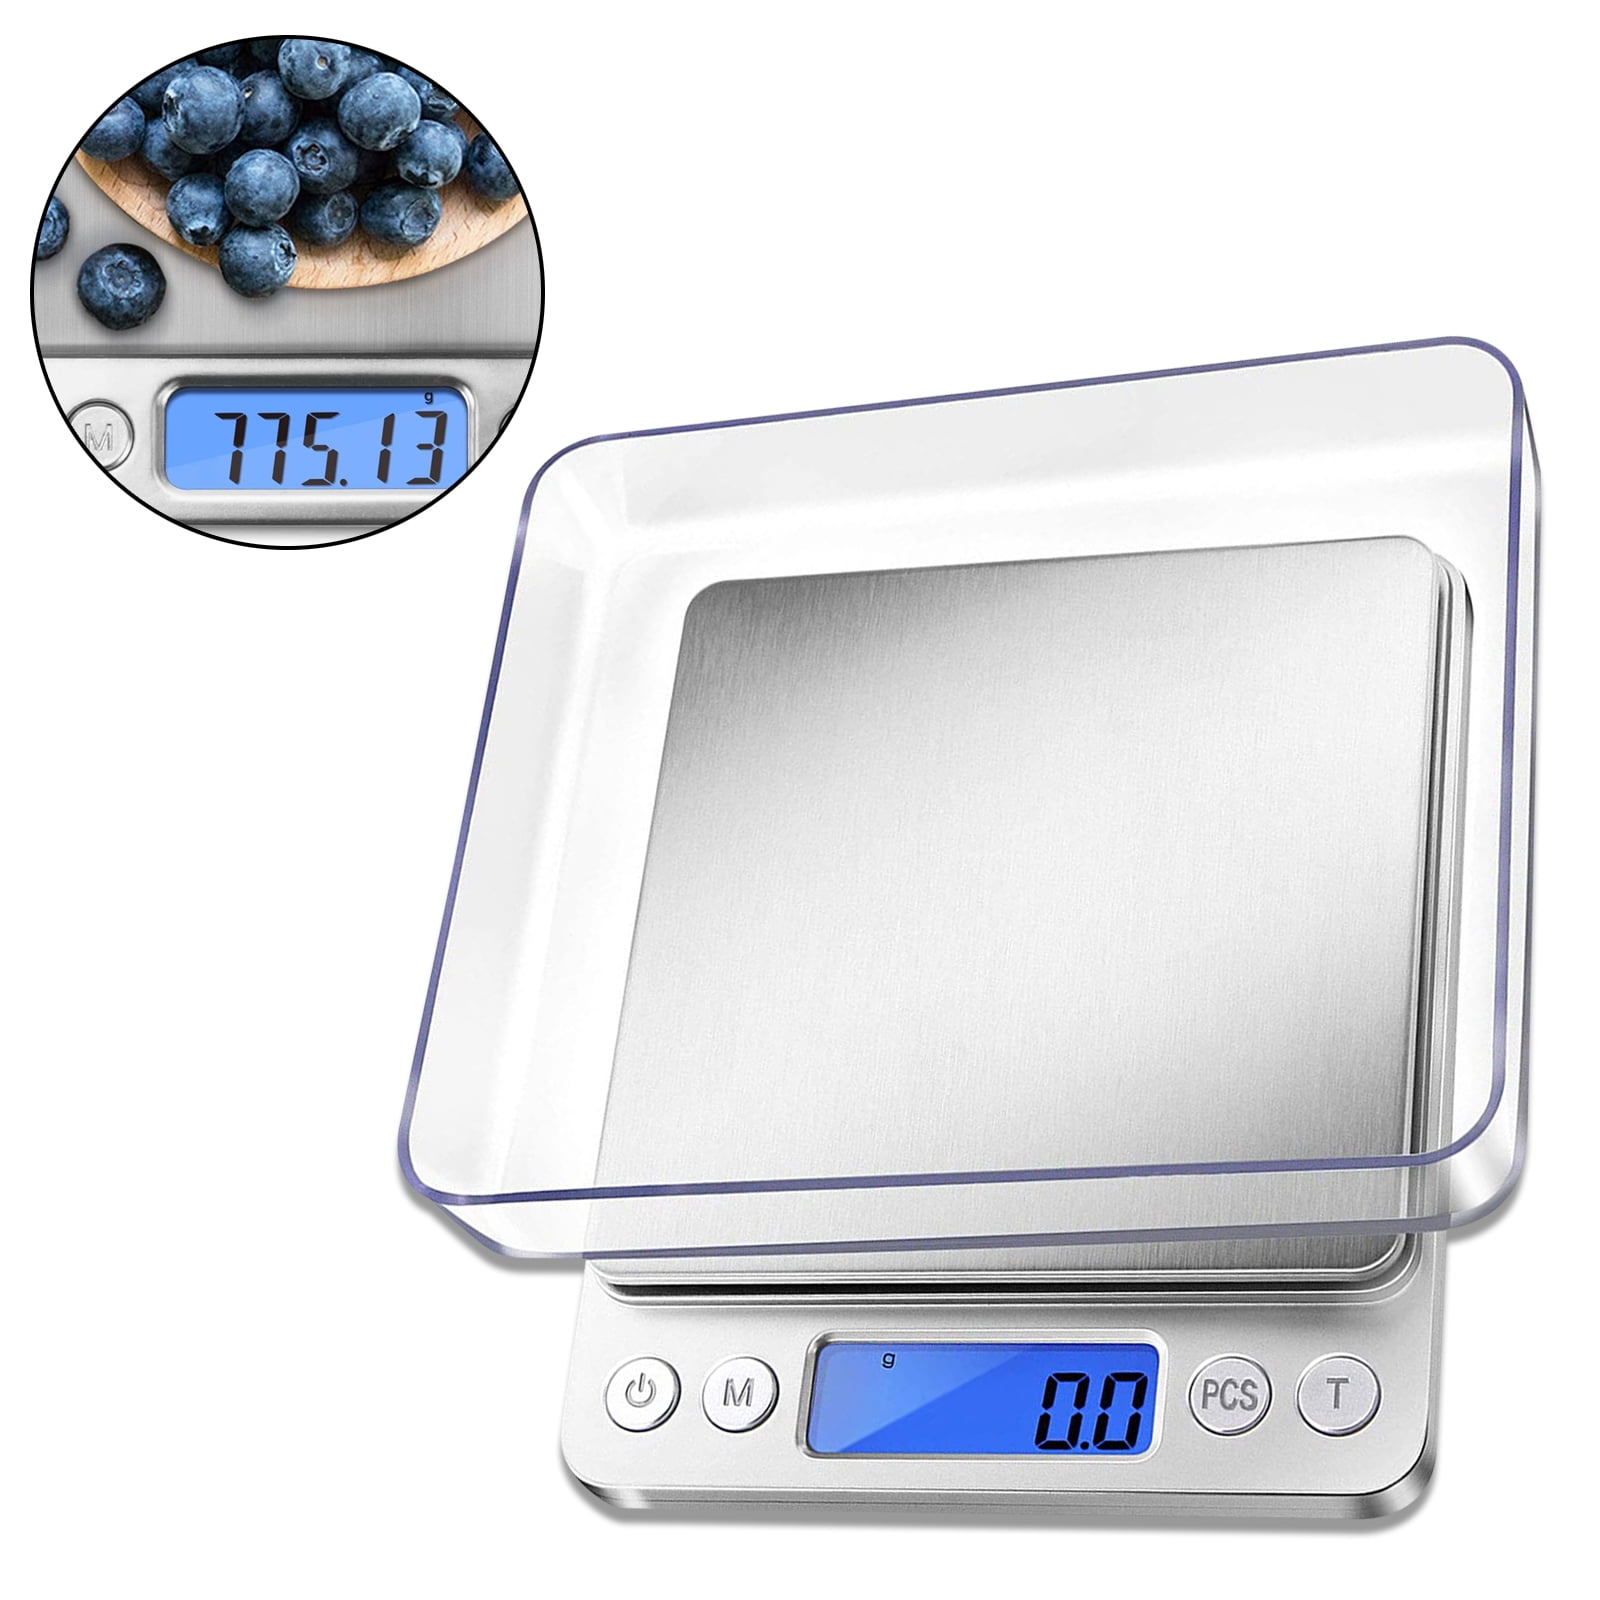 1pc Food scales, digital kitchen scales for food ounces and grams, small  electronic pocket scales for weight loss, baking, cooking, coffee, jewelry